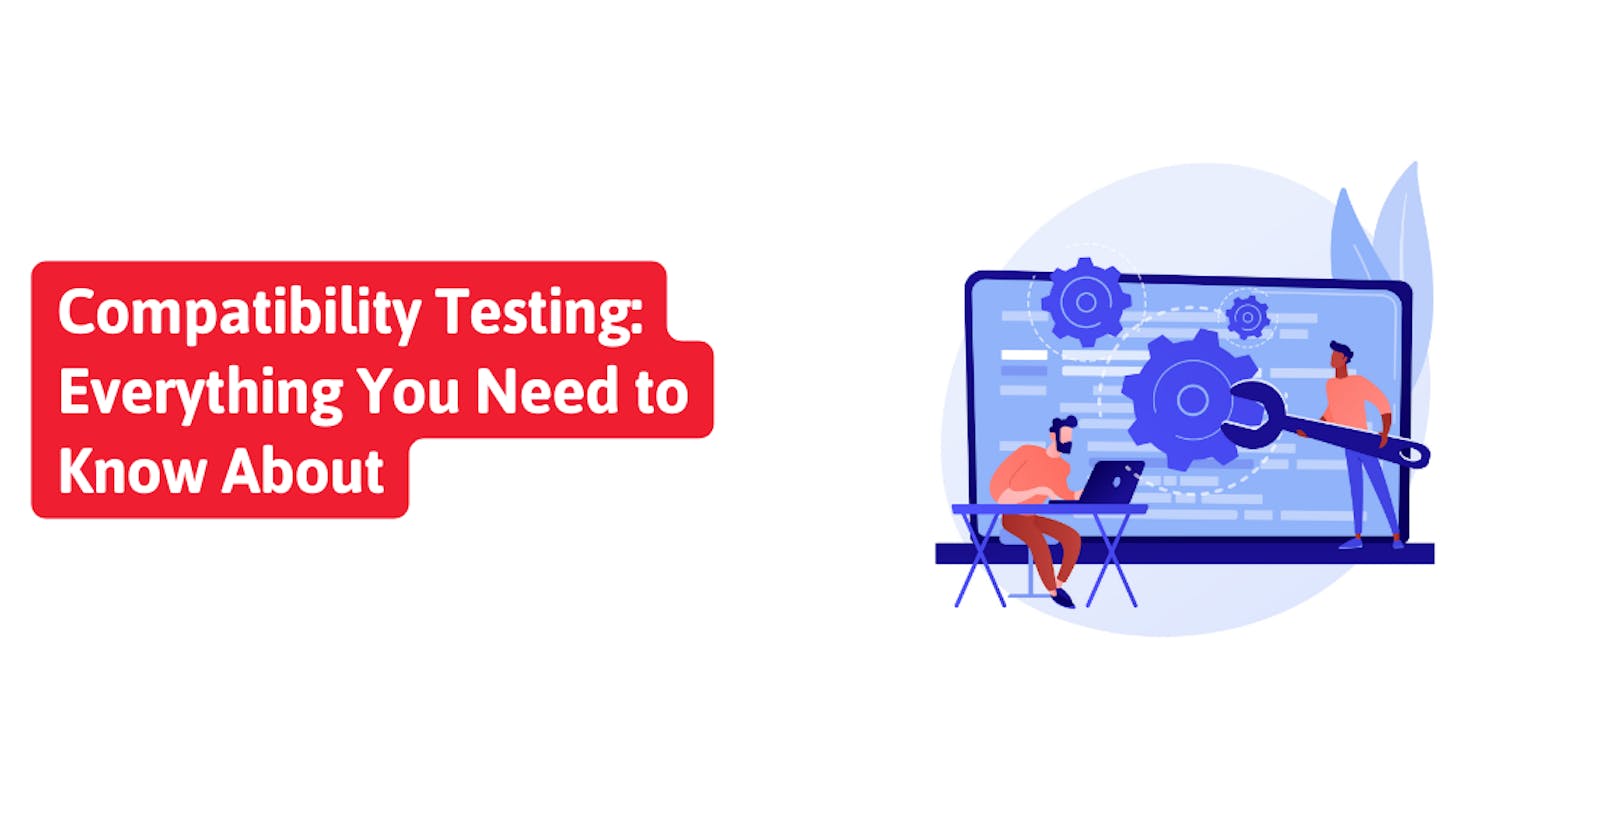 Compatibility Testing: Everything You Need to Know About